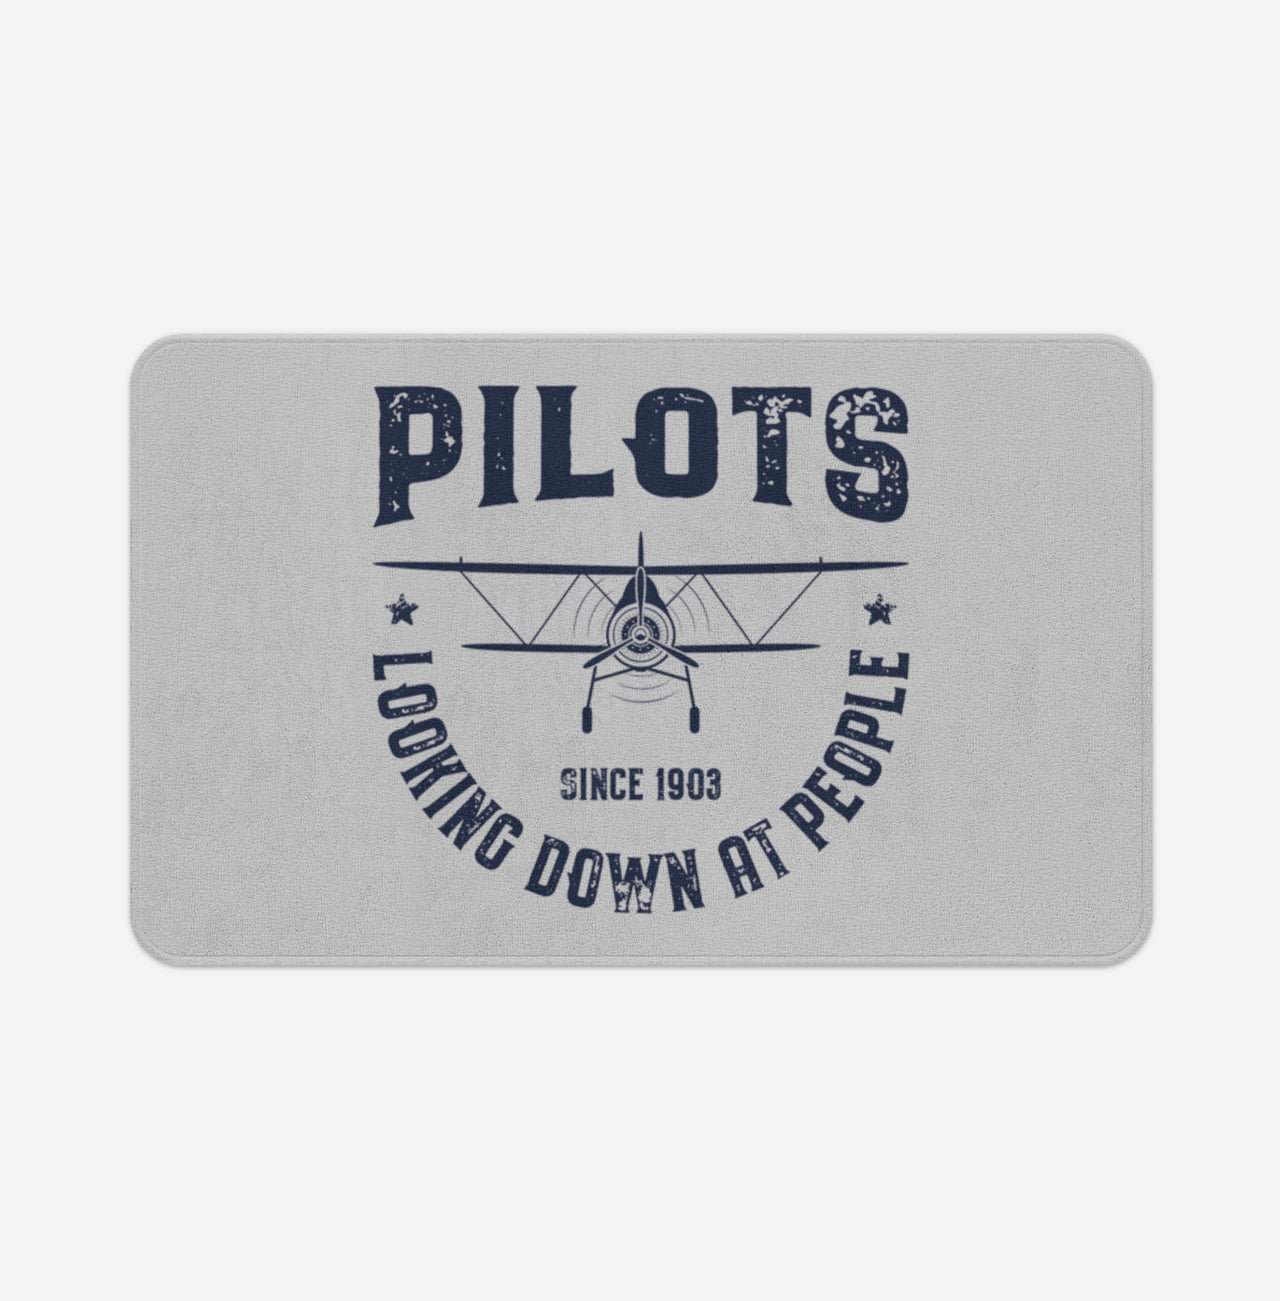 Pilots Looking Down at People Since 1903 Designed Bath Mats